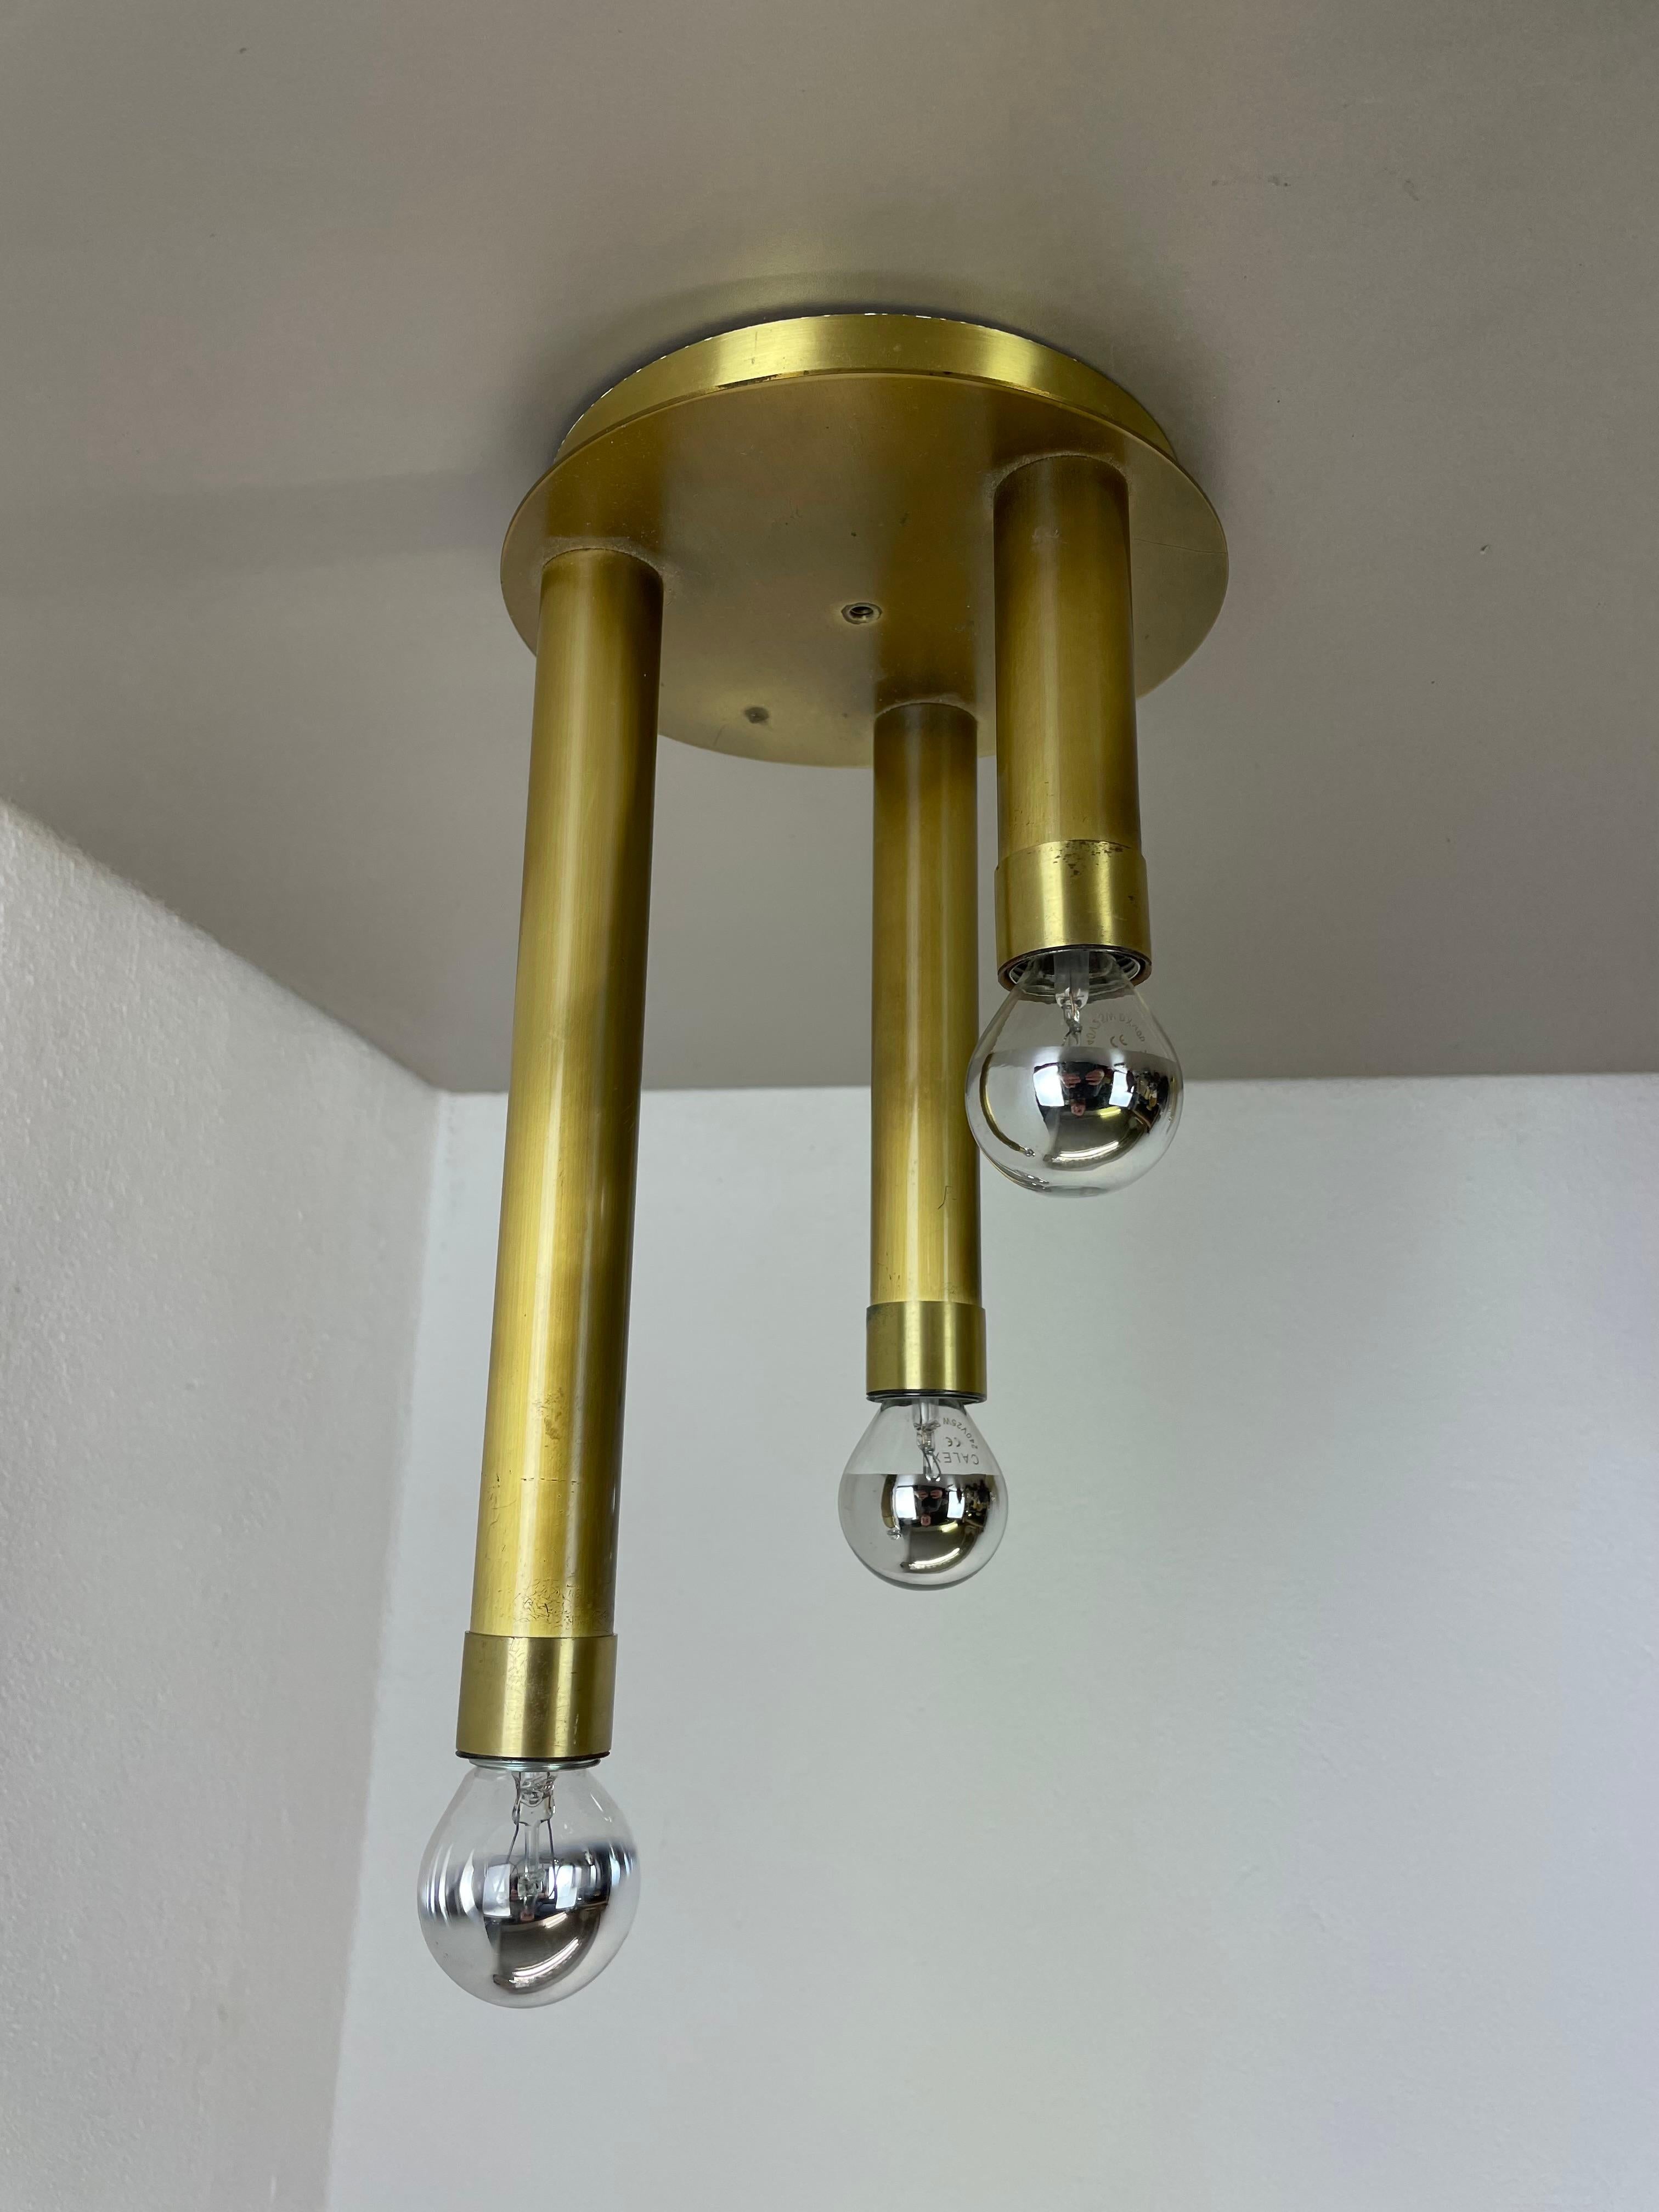 Article:

ceiling light


Producer:

Origin Italy 

in the manner of Stilnovo, Gio Ponti



Age:

1970s



This modernist light was produced in Italy in the 1970s. Minimalist space age design in cubic atomic form. It is made from solid brass with